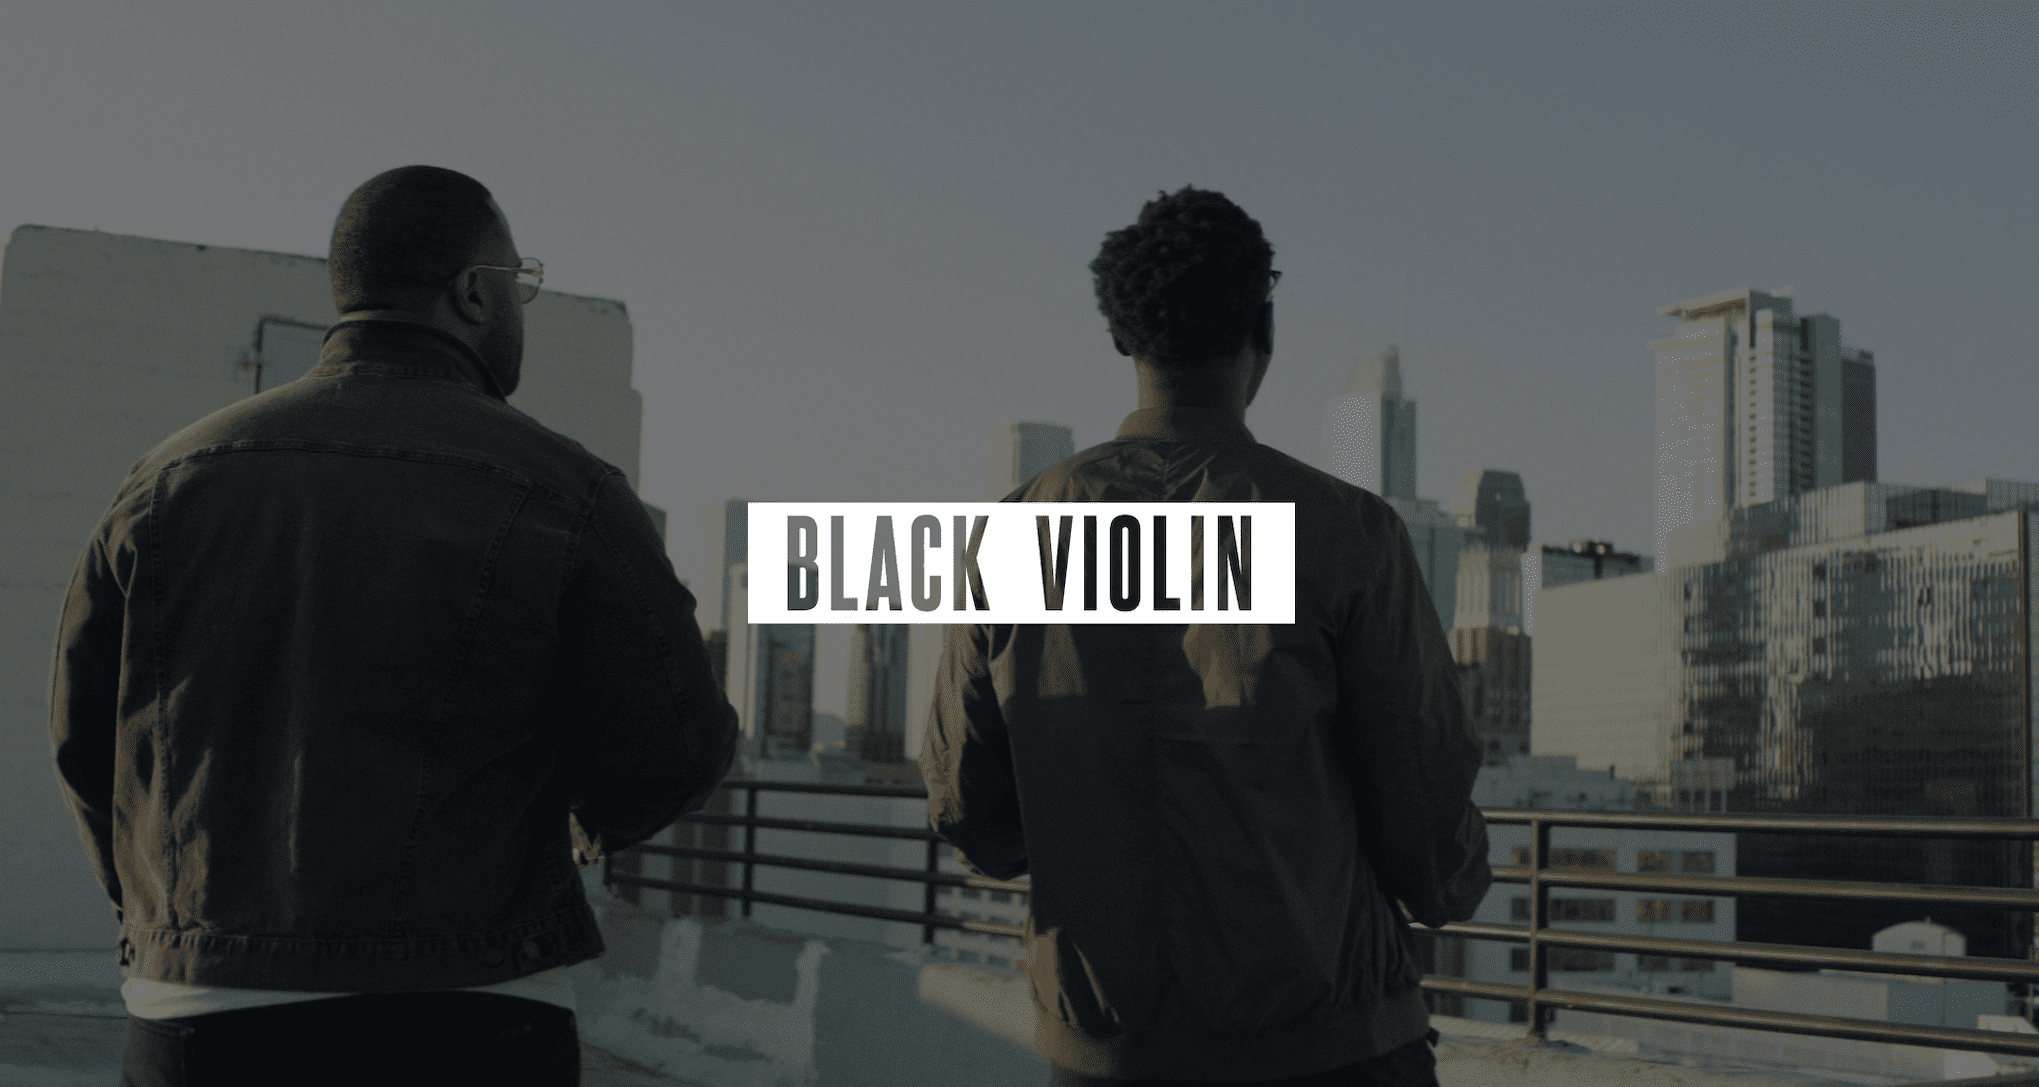 Video Production Services to Podcast Recording Studio Gray Black Violin logo on white against a dimmed background of two men standing on a concrete rooftop looking out over the city